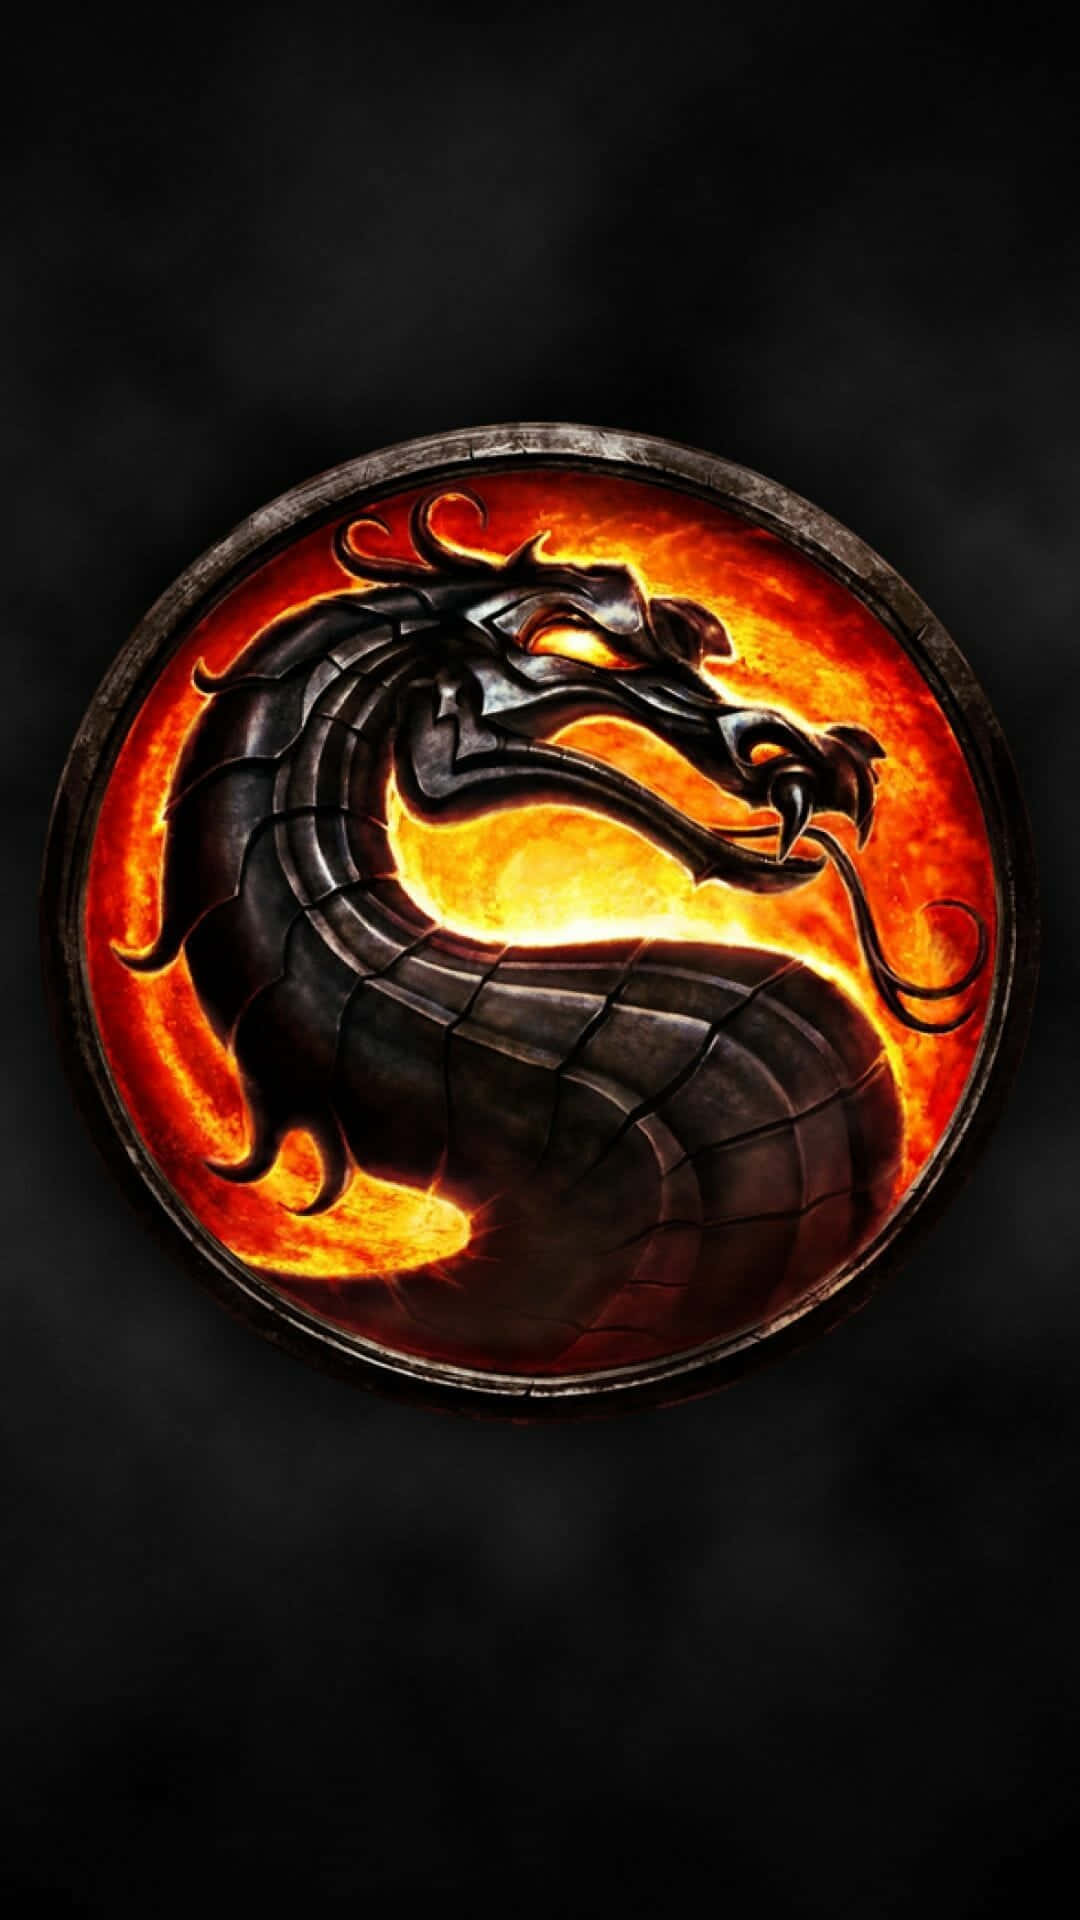 Experience the thrill of Mortal Kombat on your iPhone! Wallpaper